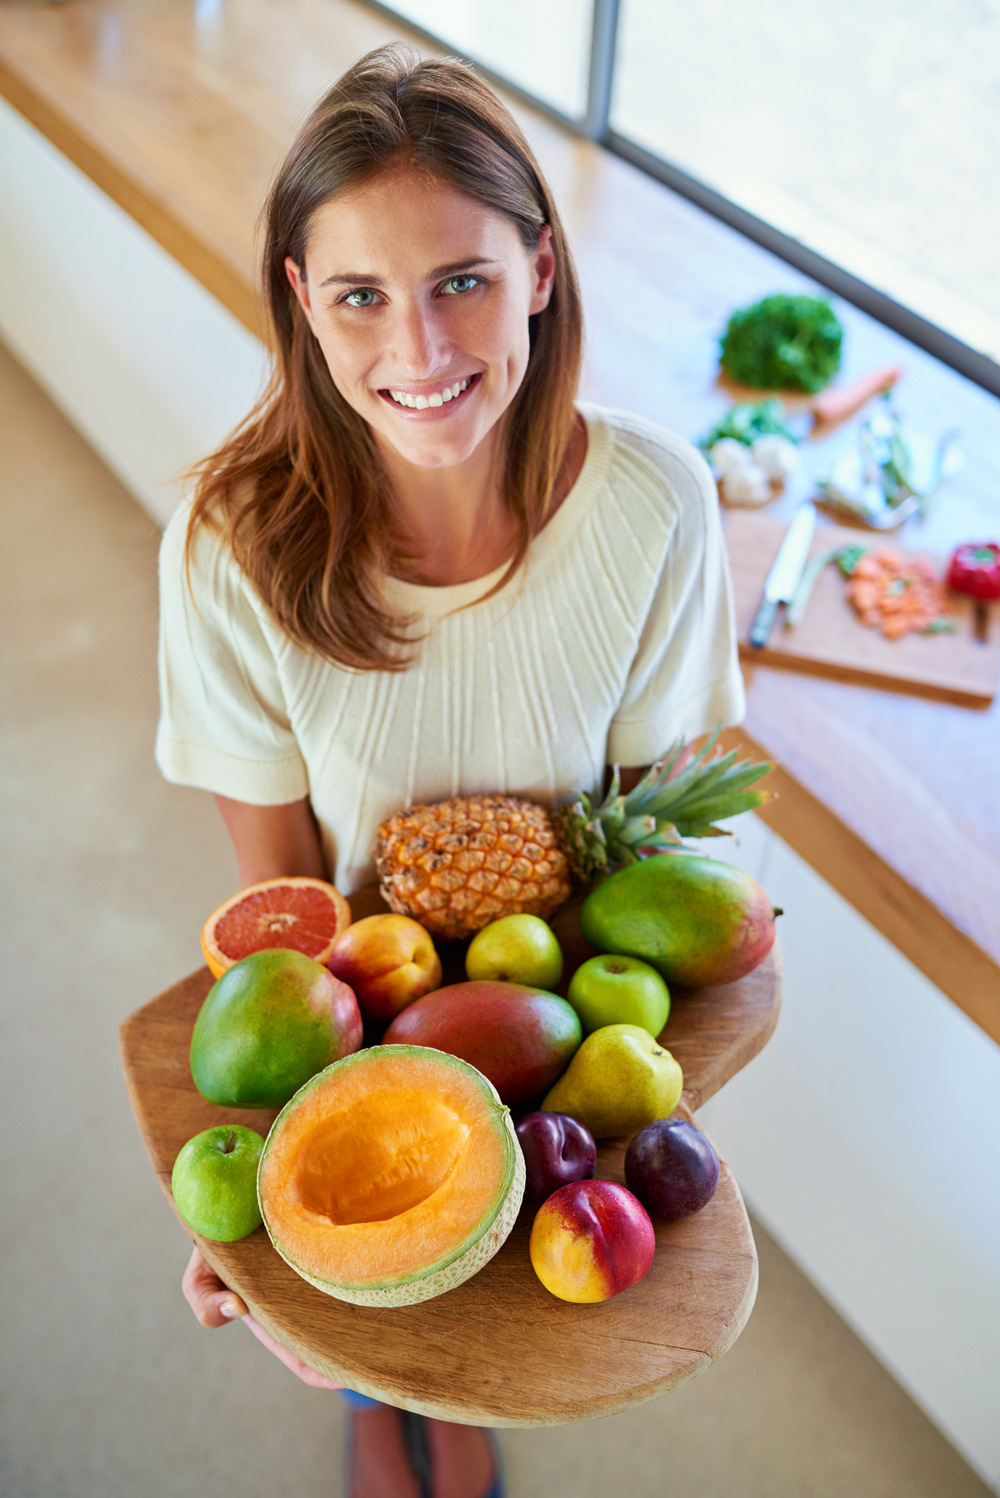 A woman in her thirties holding a basket of fresh fruit and smiling